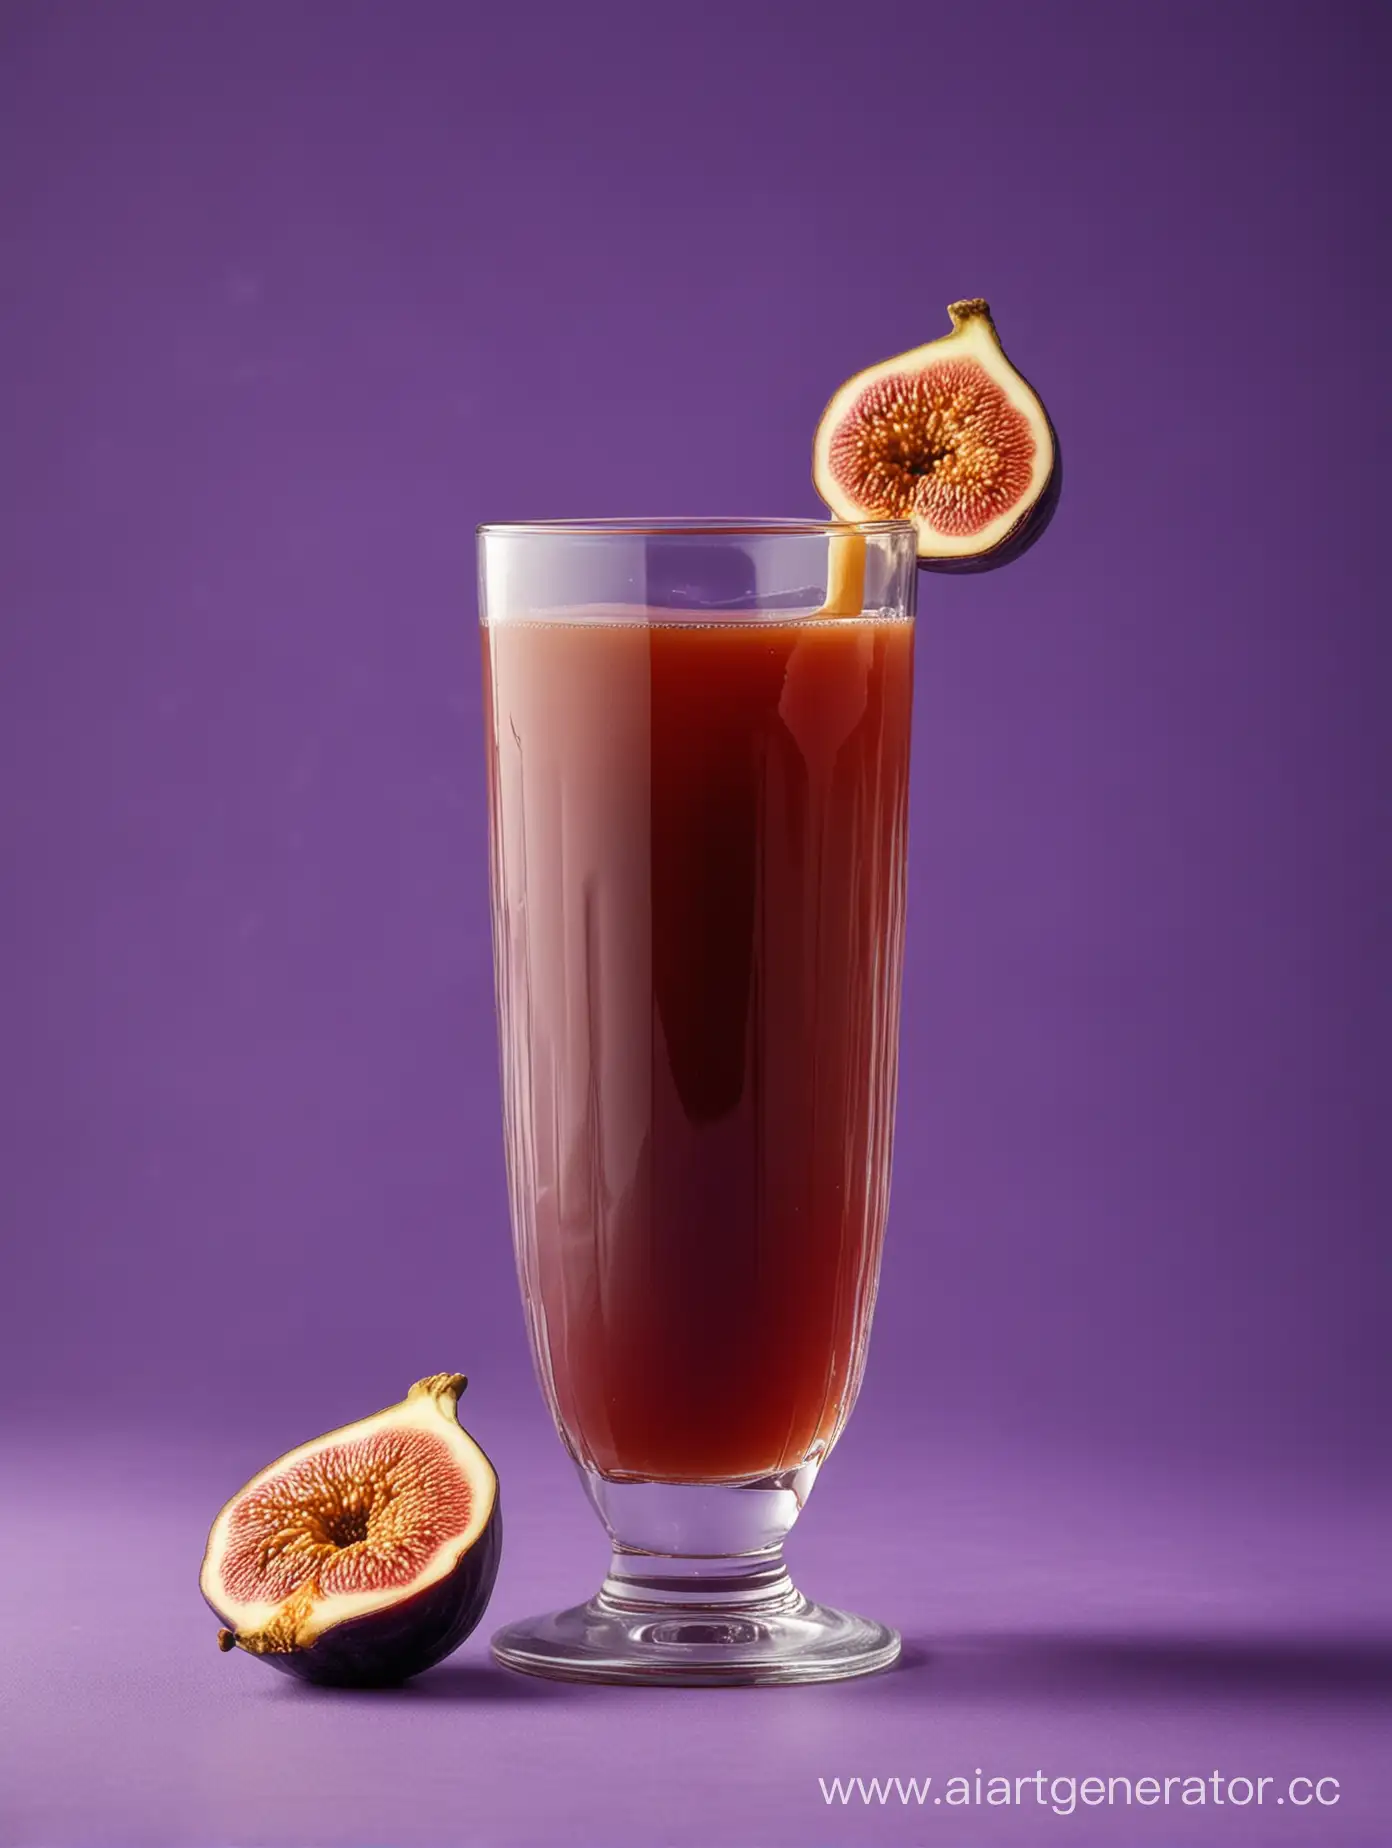 Ripe-Fig-with-Refreshing-Juice-in-Elegant-Glass-on-Vibrant-Purple-Background